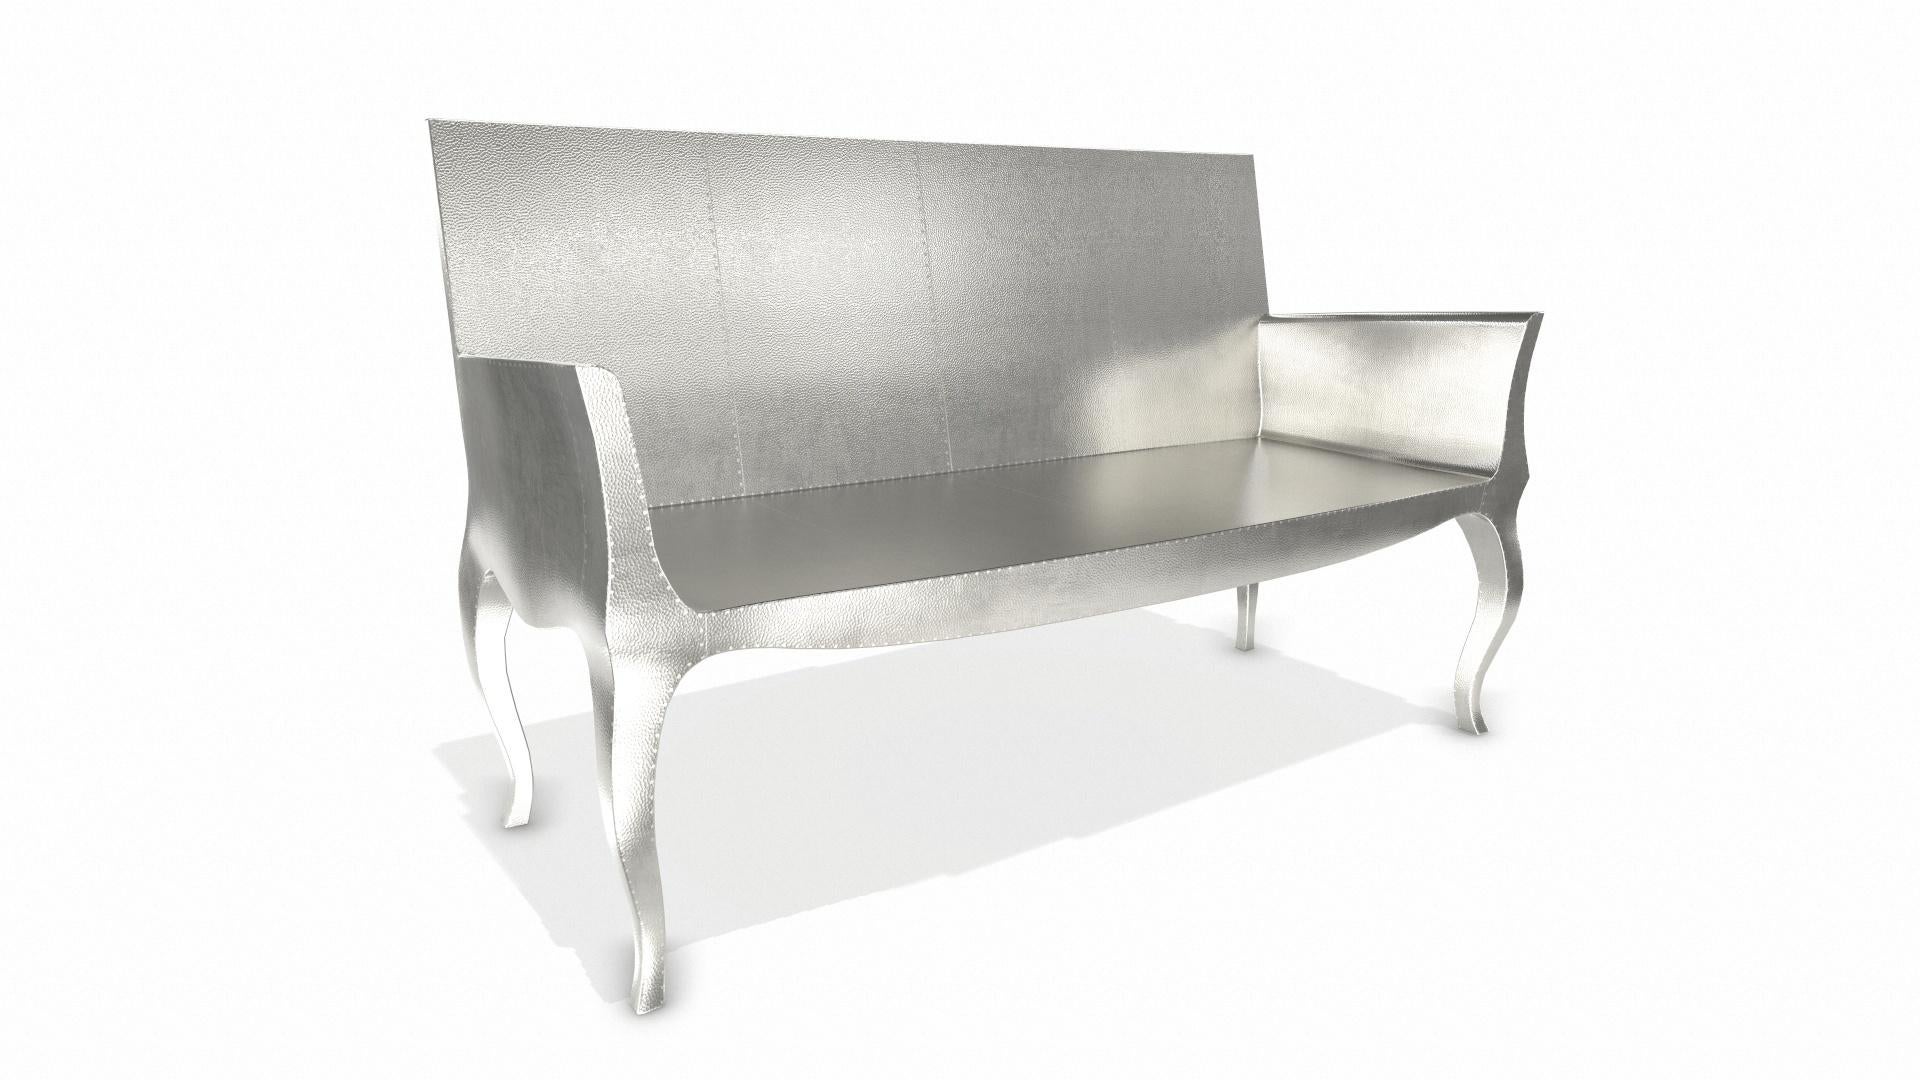 Contemporary Louise Settee Art Deco Daybeds in Mid. Hammered White Bronze by Paul Mathieu For Sale